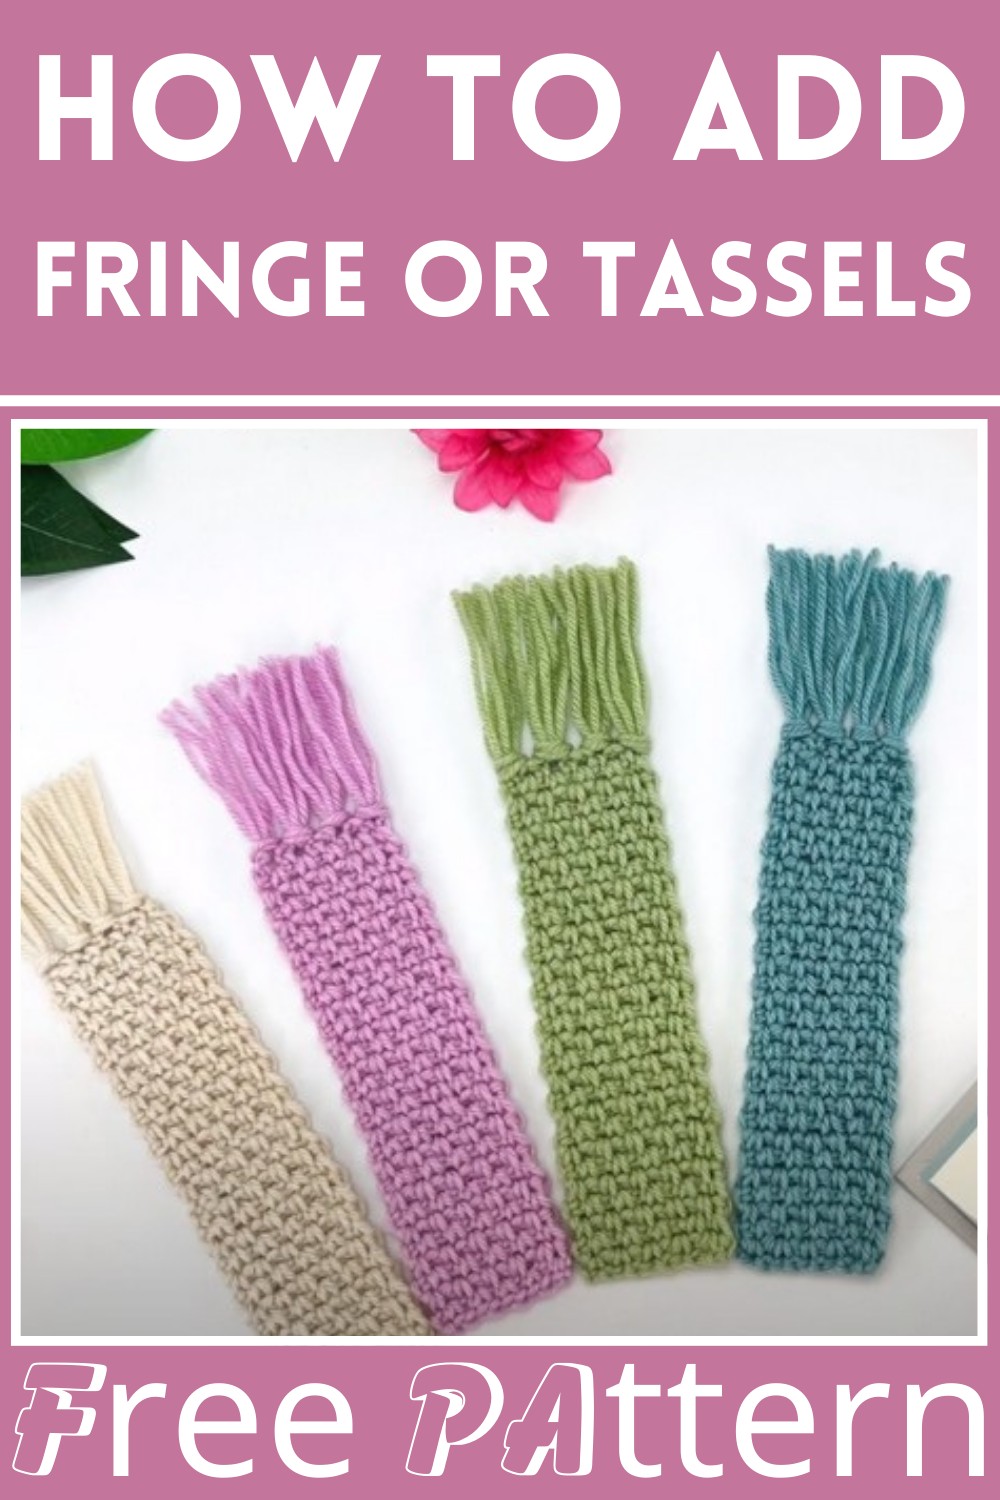 How To Add Fringe Or Tassels To Crochet Projects